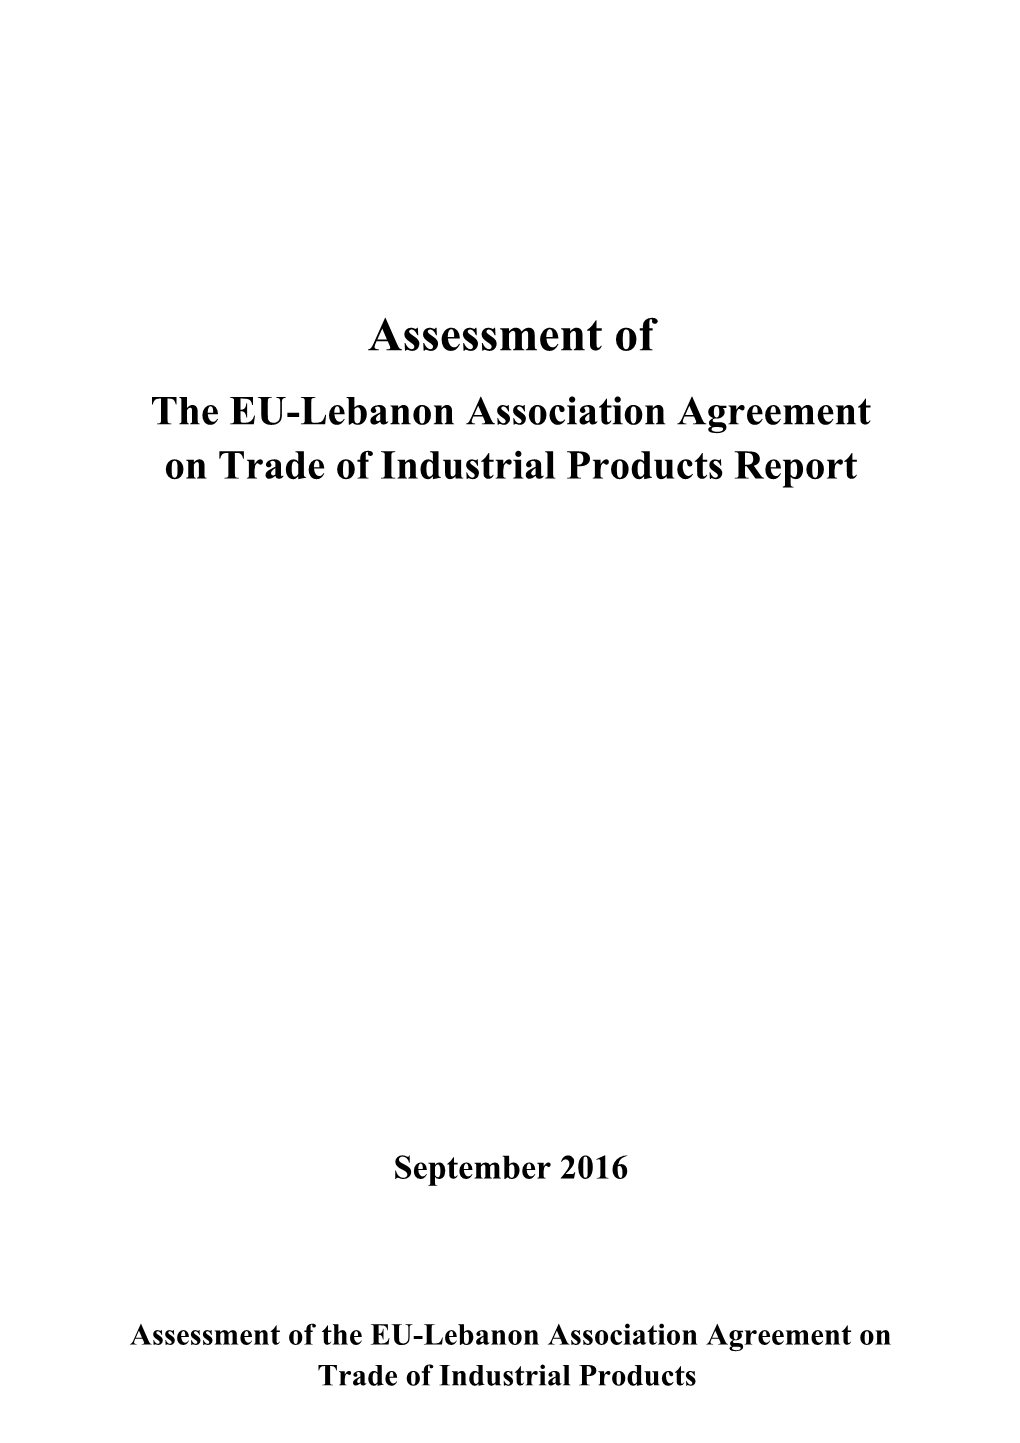 The EU-Lebanon Association Agreement on Trade of Industrial Products Report